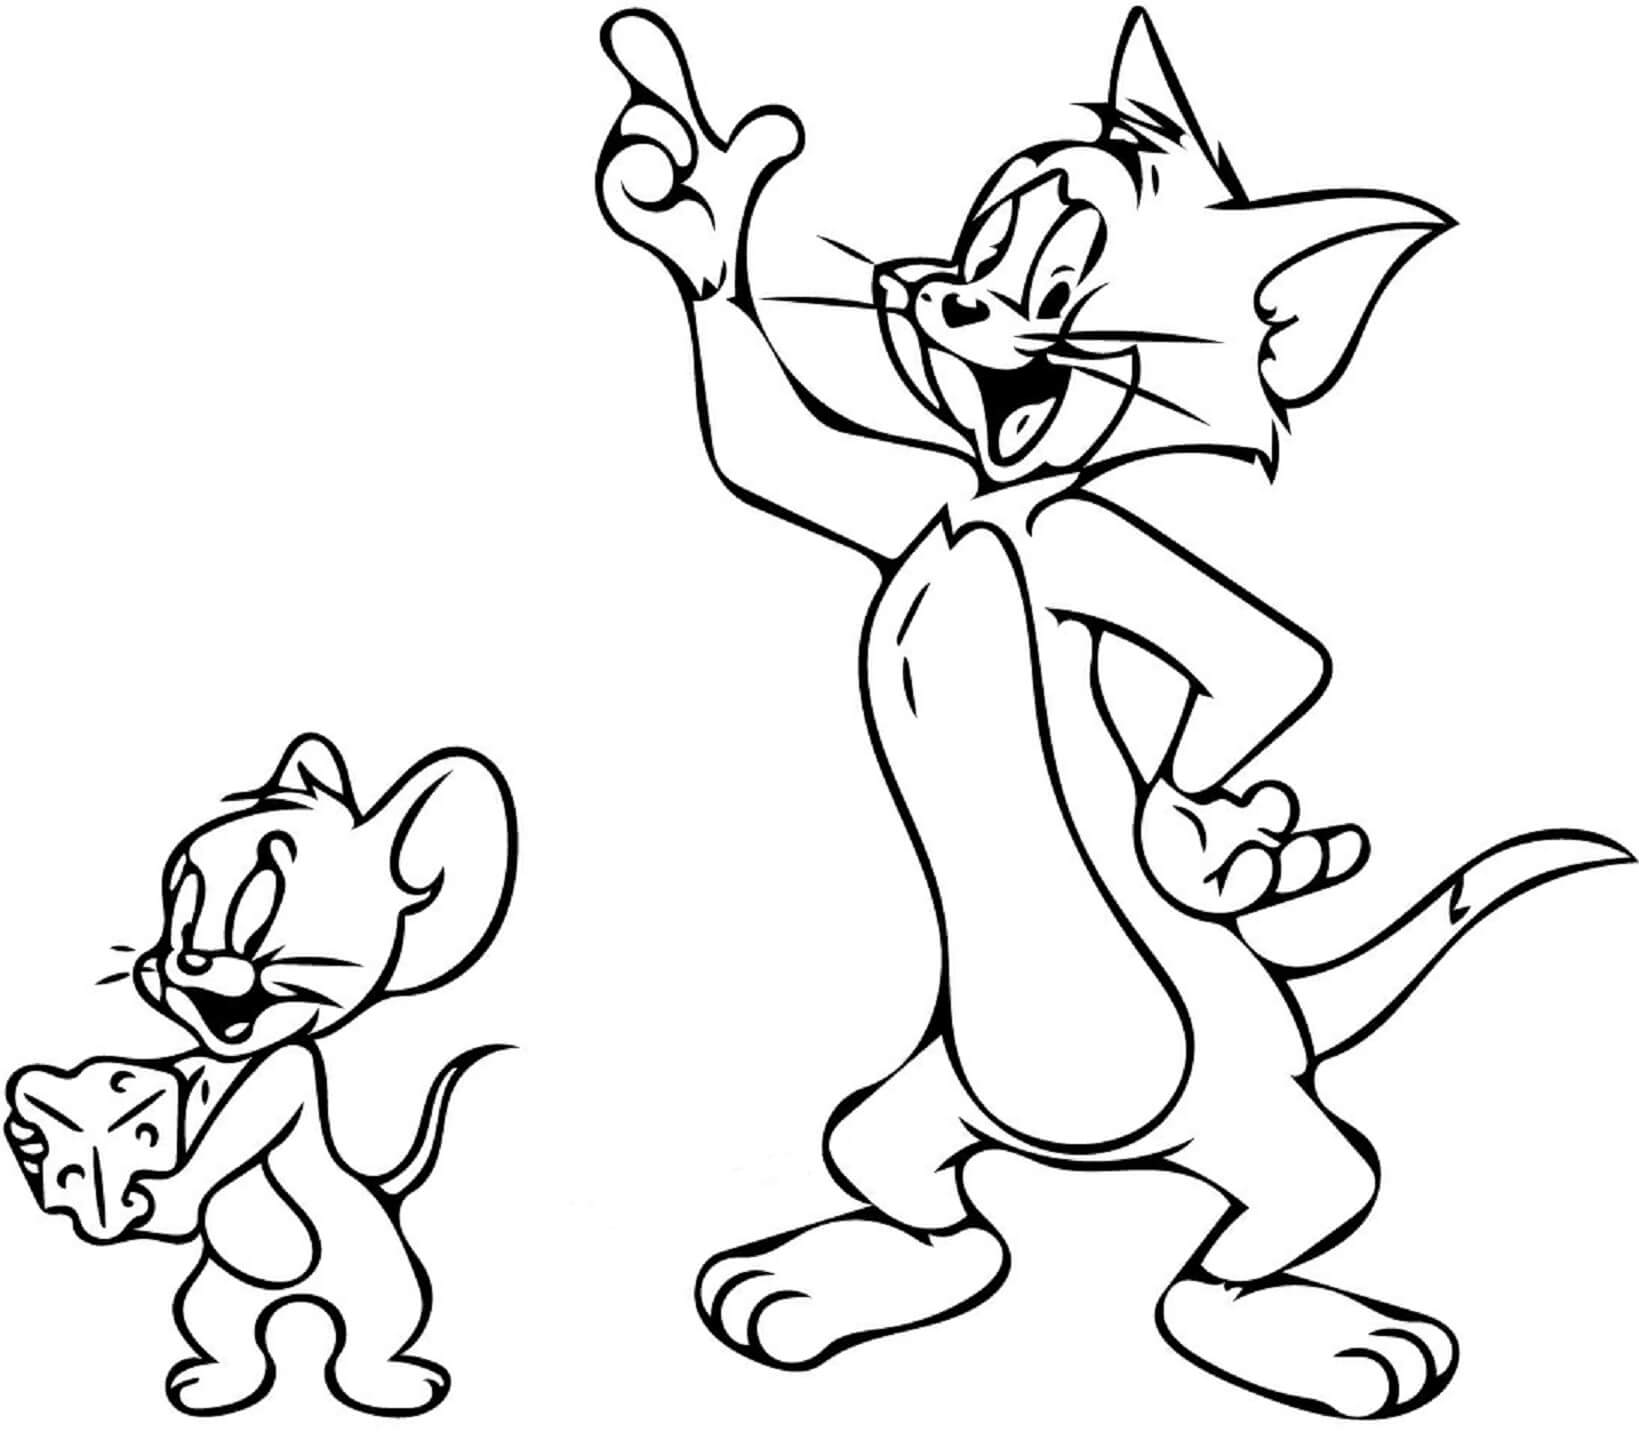 How To Draw Tom | Tom and Jerry - YouTube